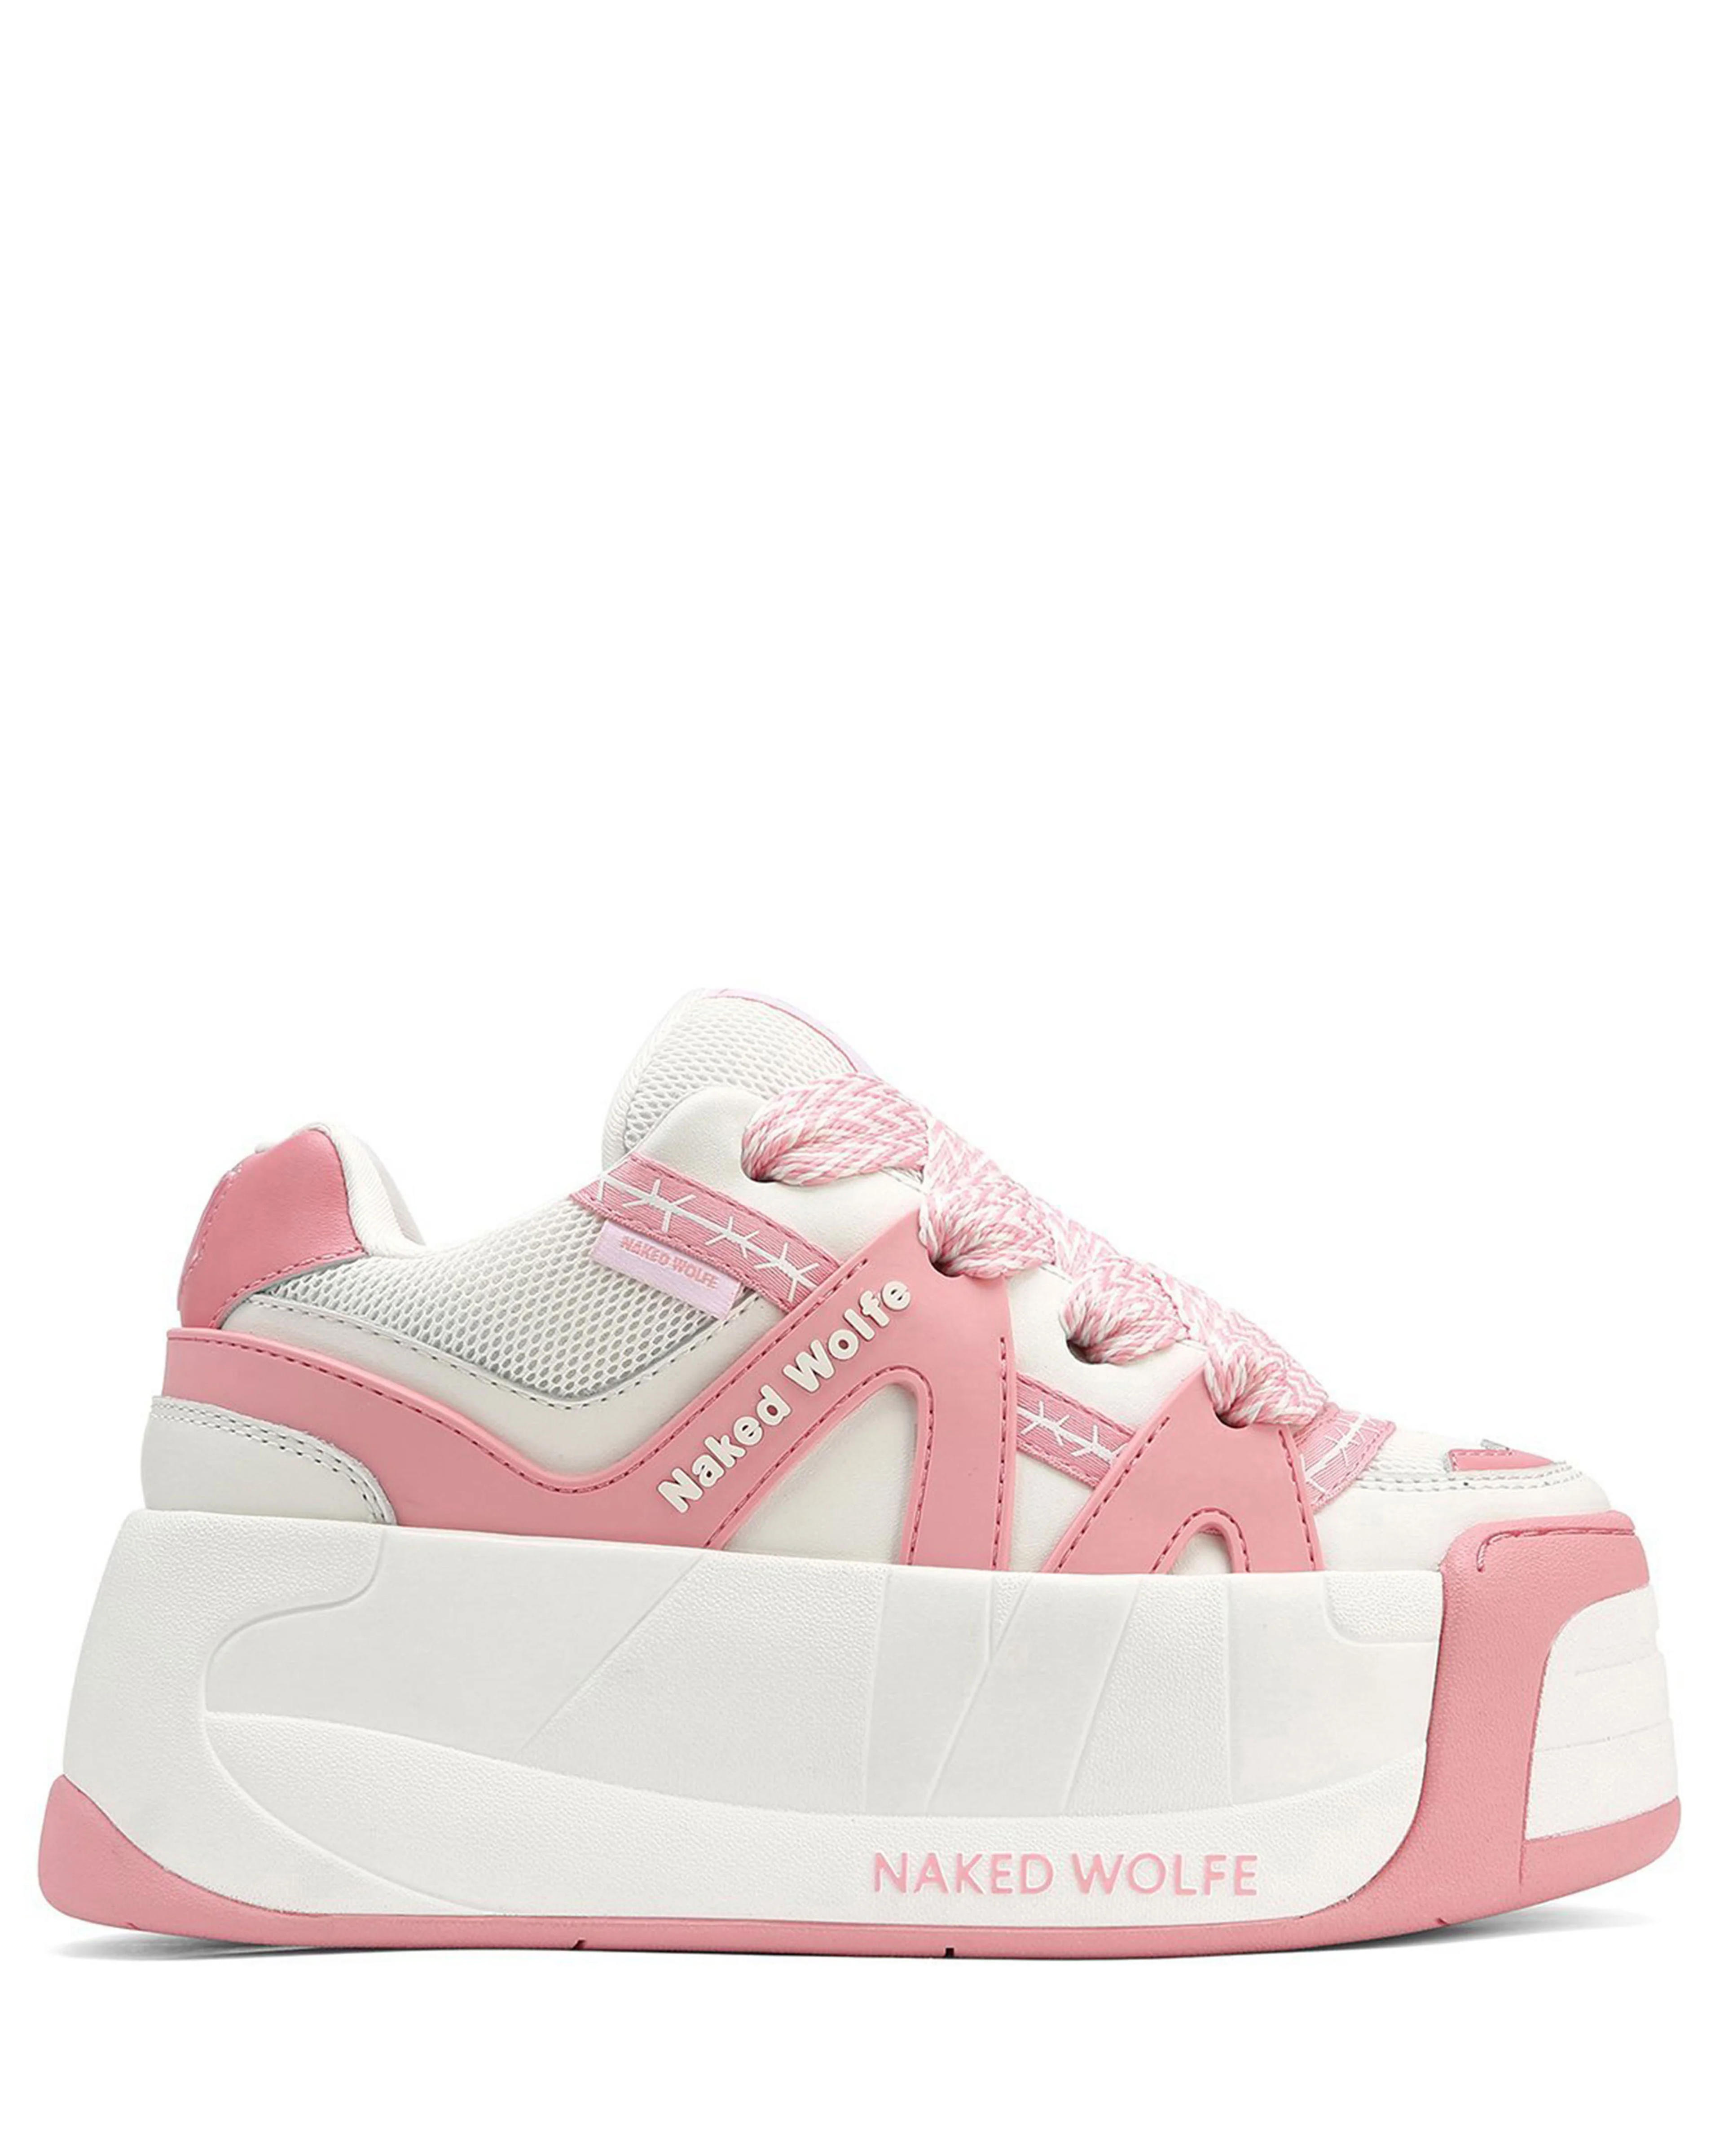 Slider Baby Pink – Naked Wolfe